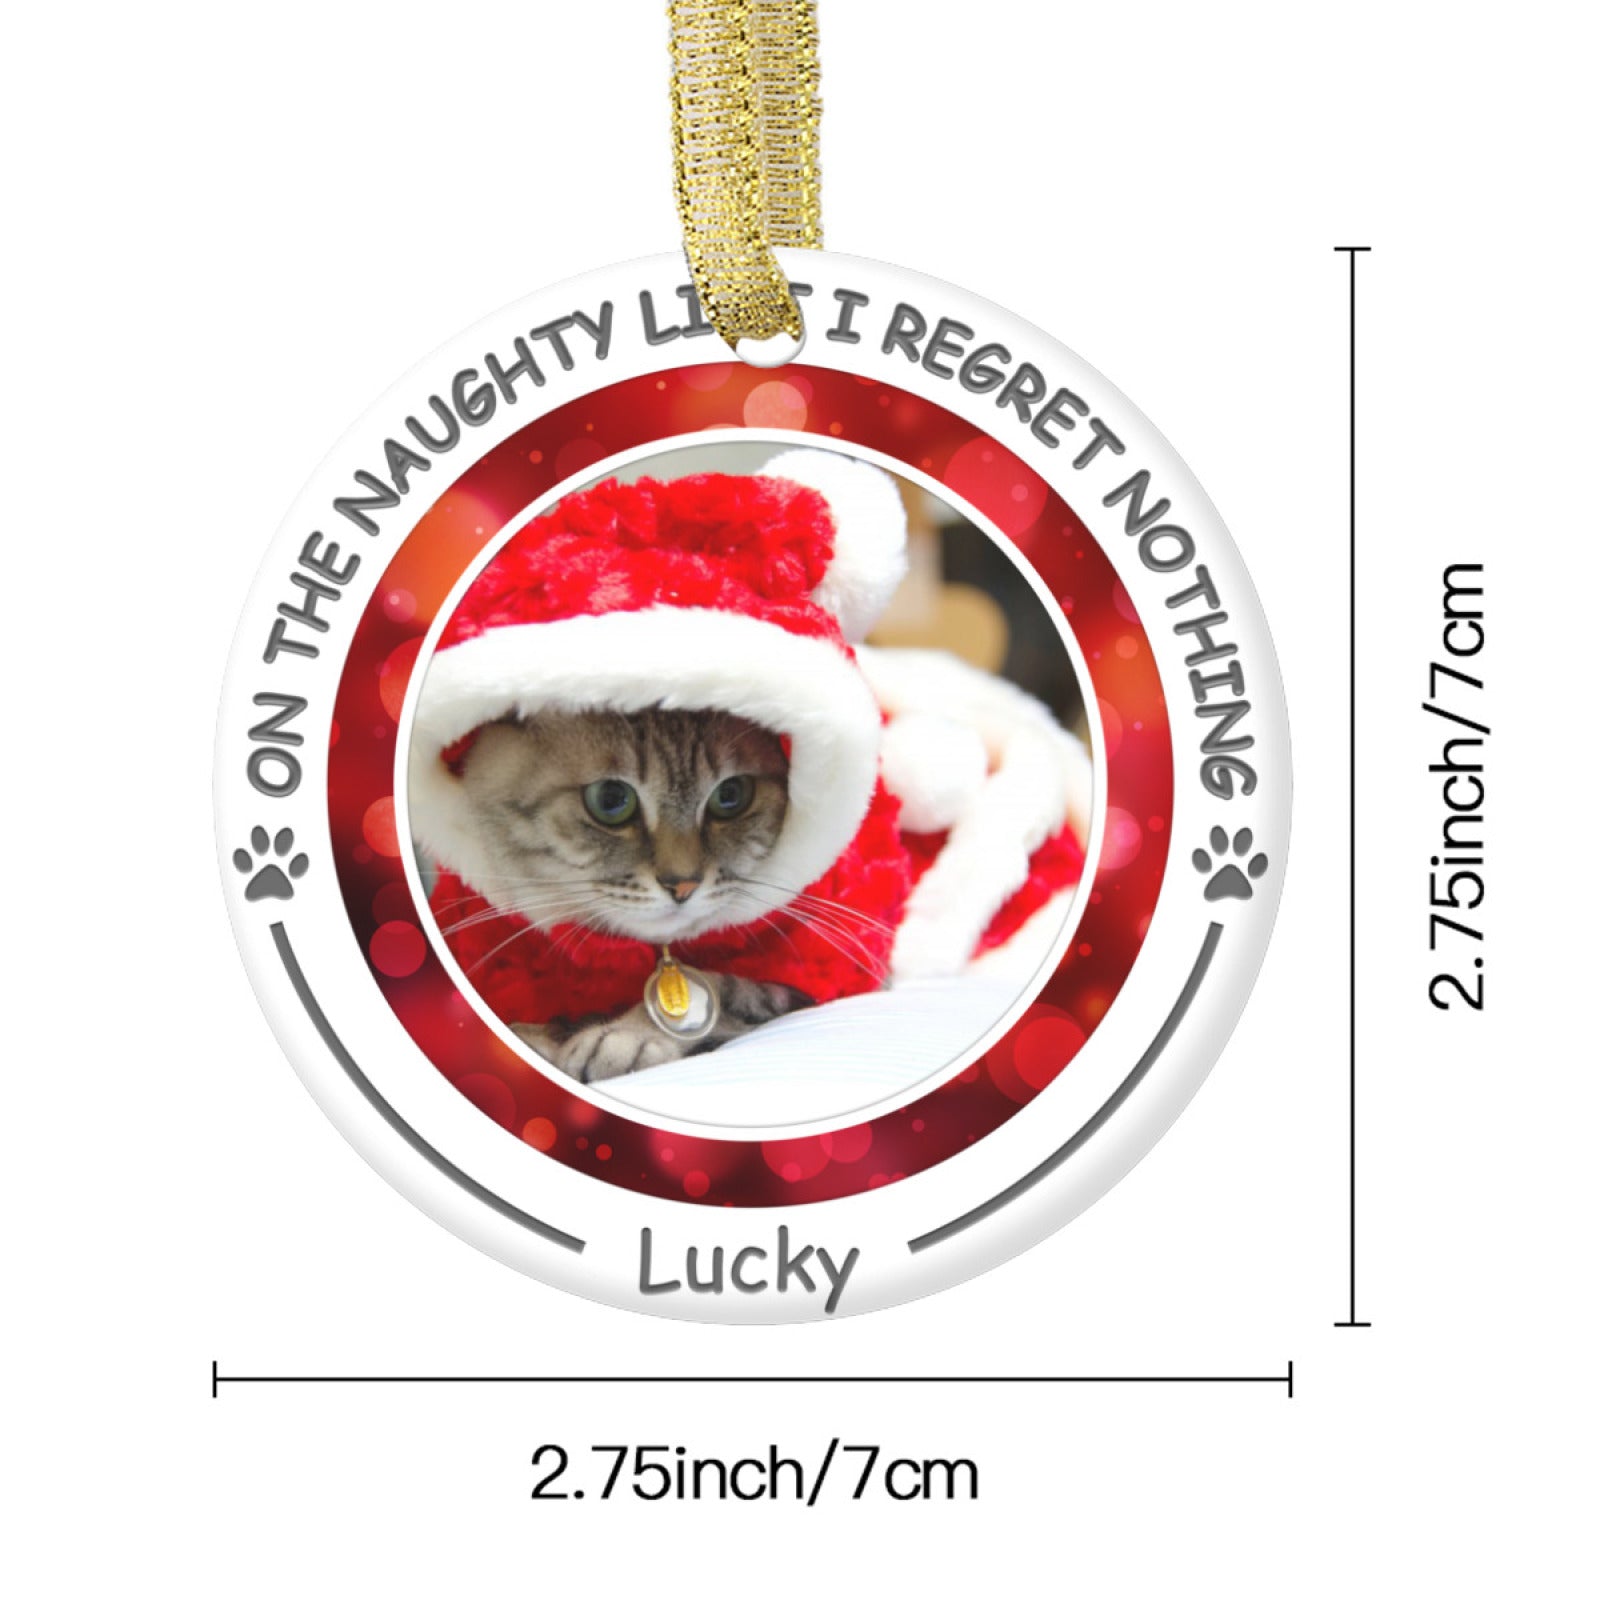 On The Naughty List I Regret Nothing - Personalized Custom Round Shaped Ceramic Photo Christmas Ornament - Upload Image, Gifts For Pet Lovers, Christmas Gifts